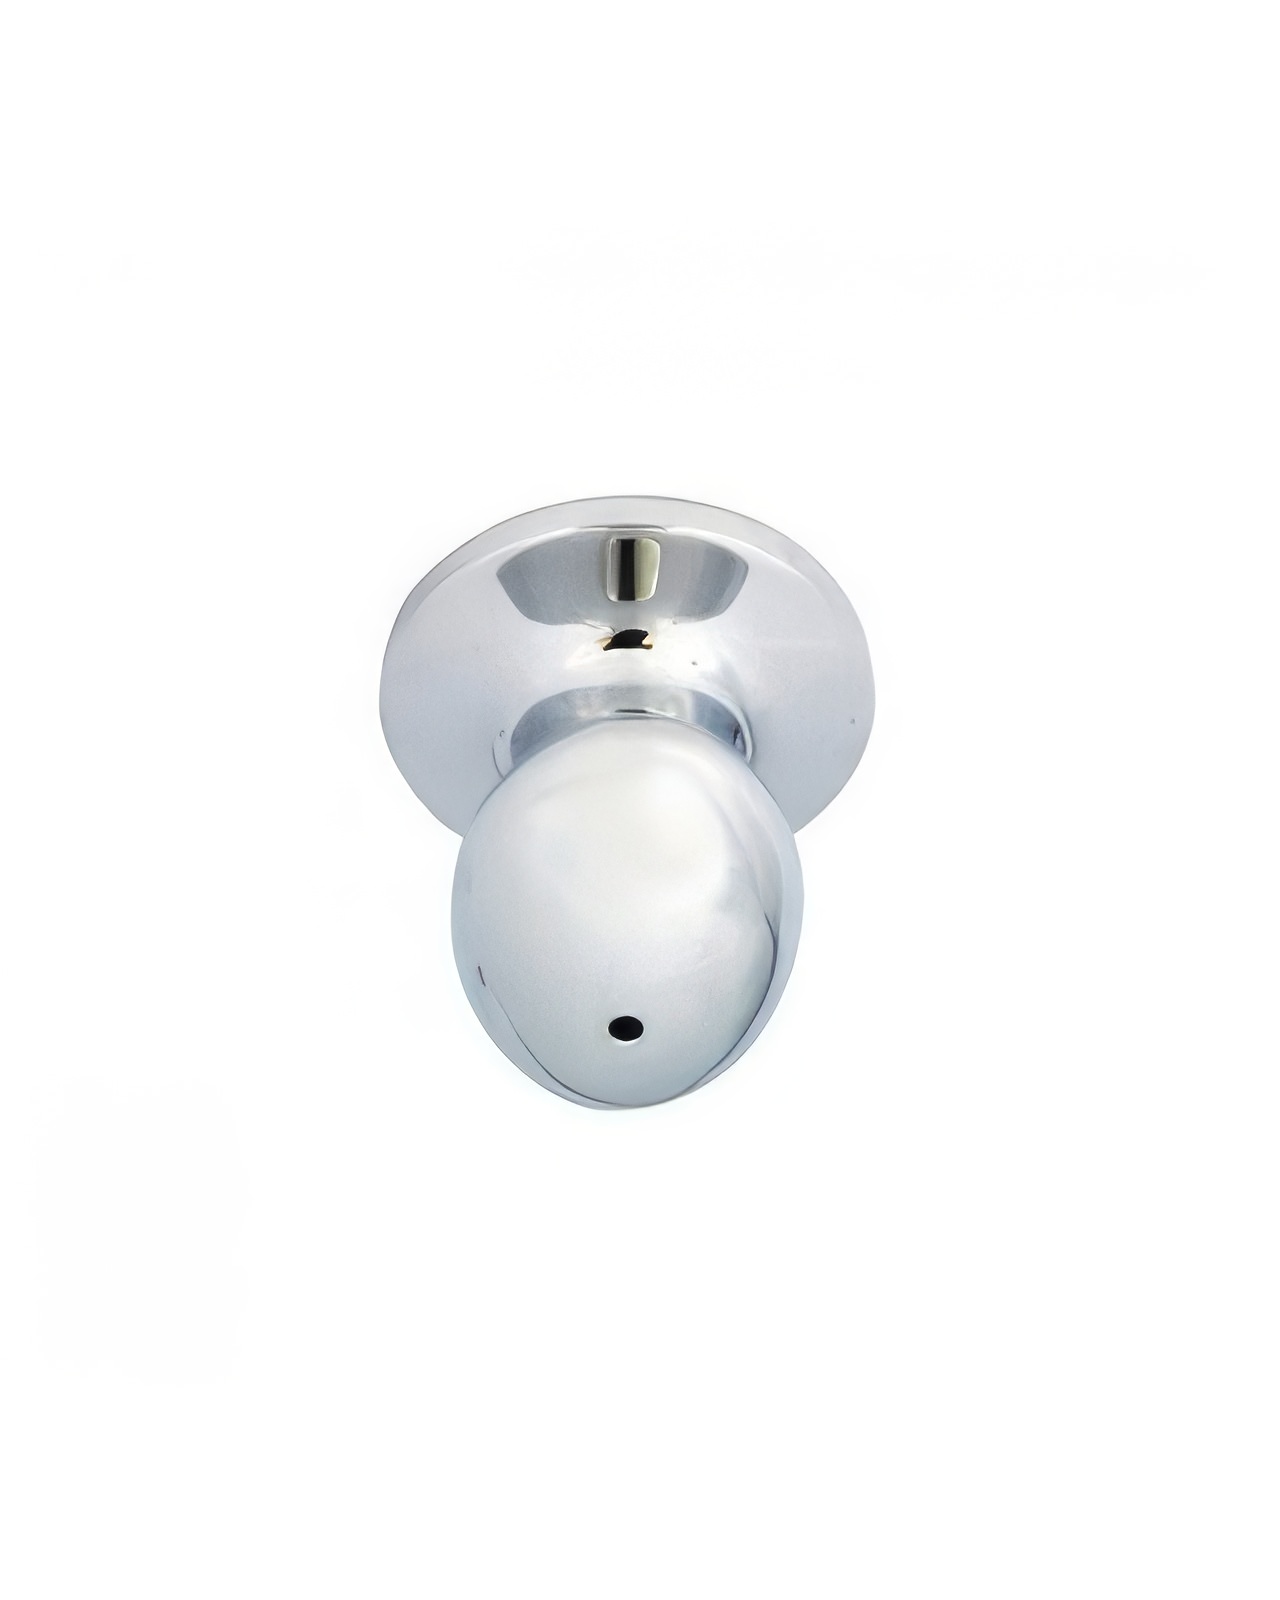 Better Home Products Miraloma Privacy Door Knob